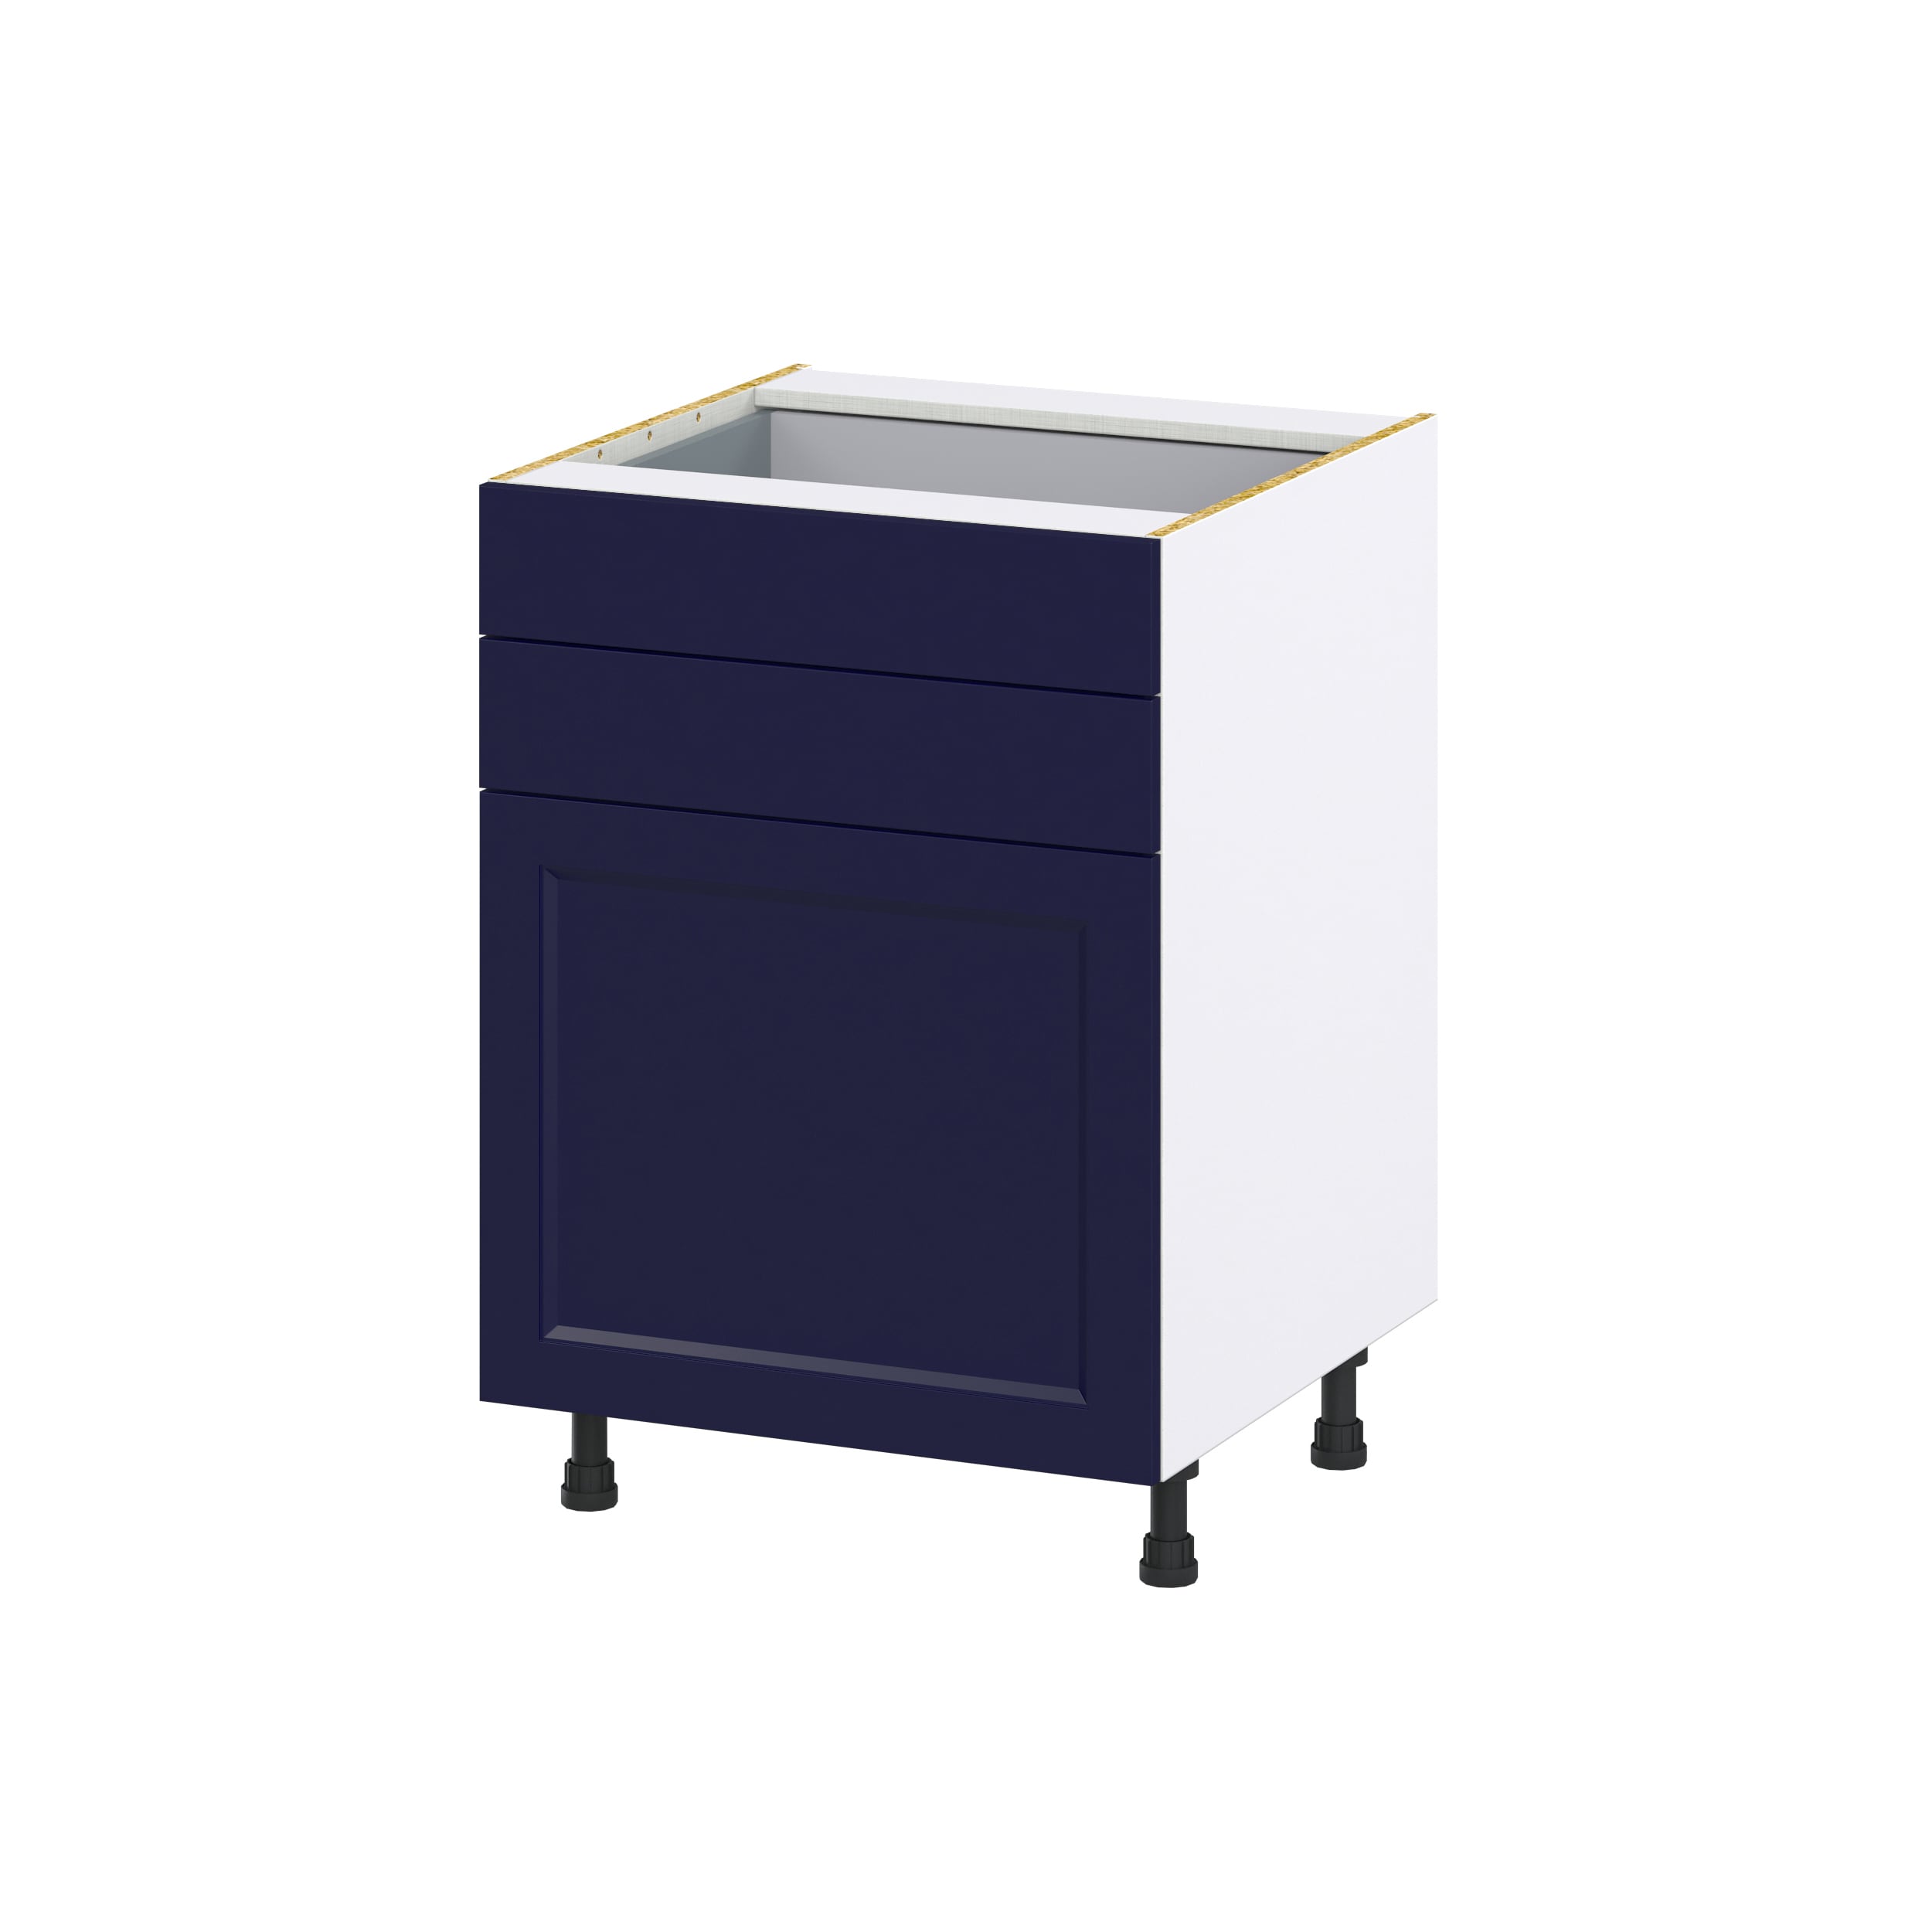 Hugo&Borg Lorette 24-in W x 34.5-in H x 24-in D Navy Blue Door and ...